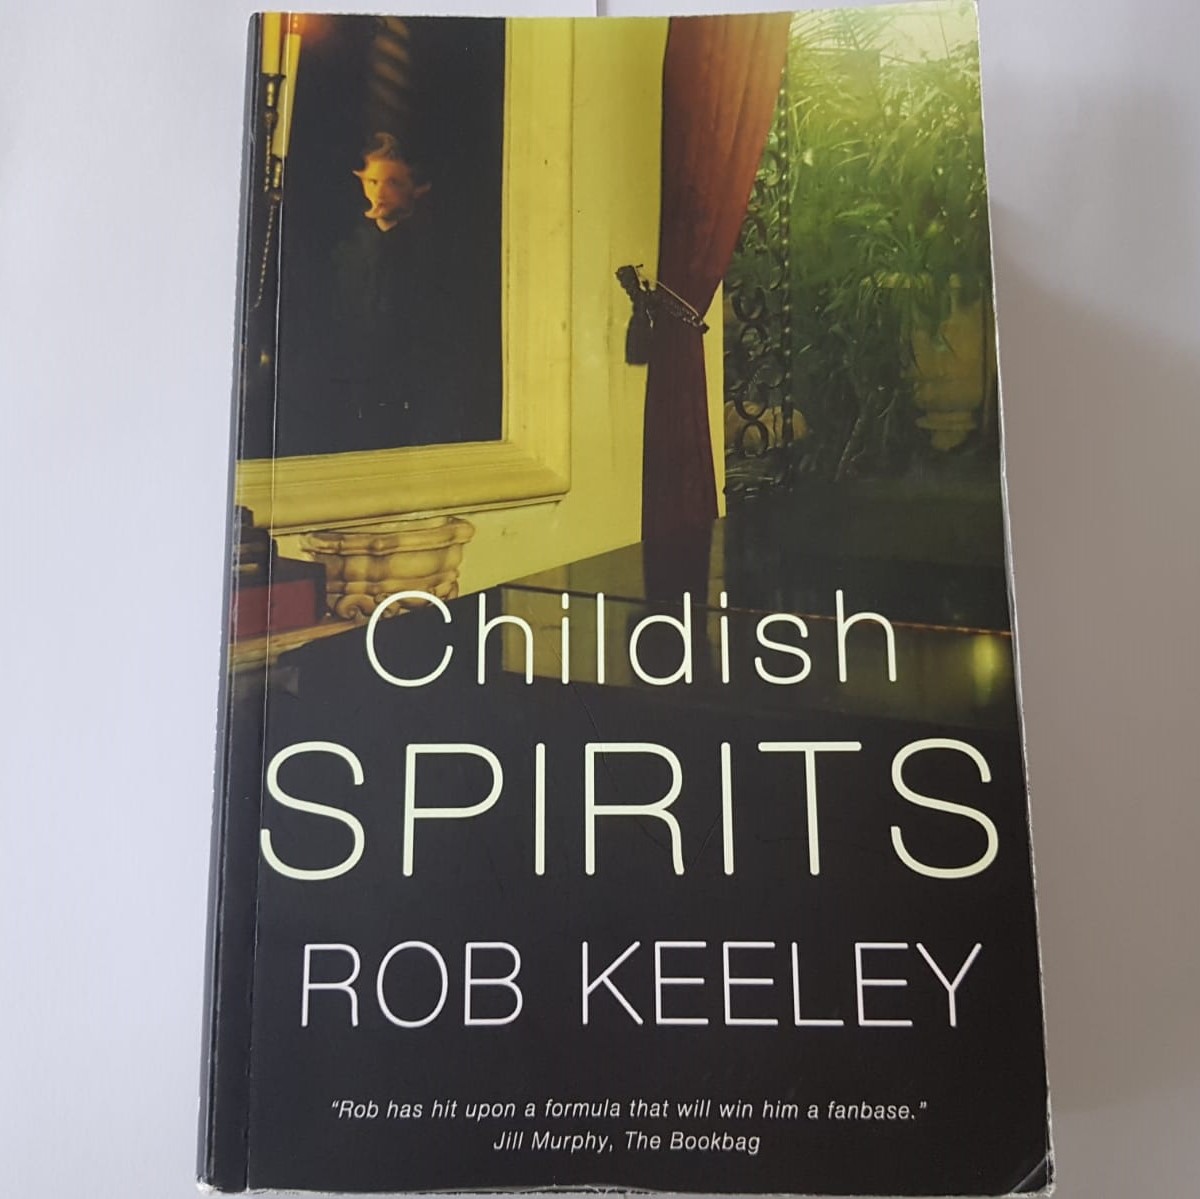 Book Review: Childish Spirits by Rob Keeley